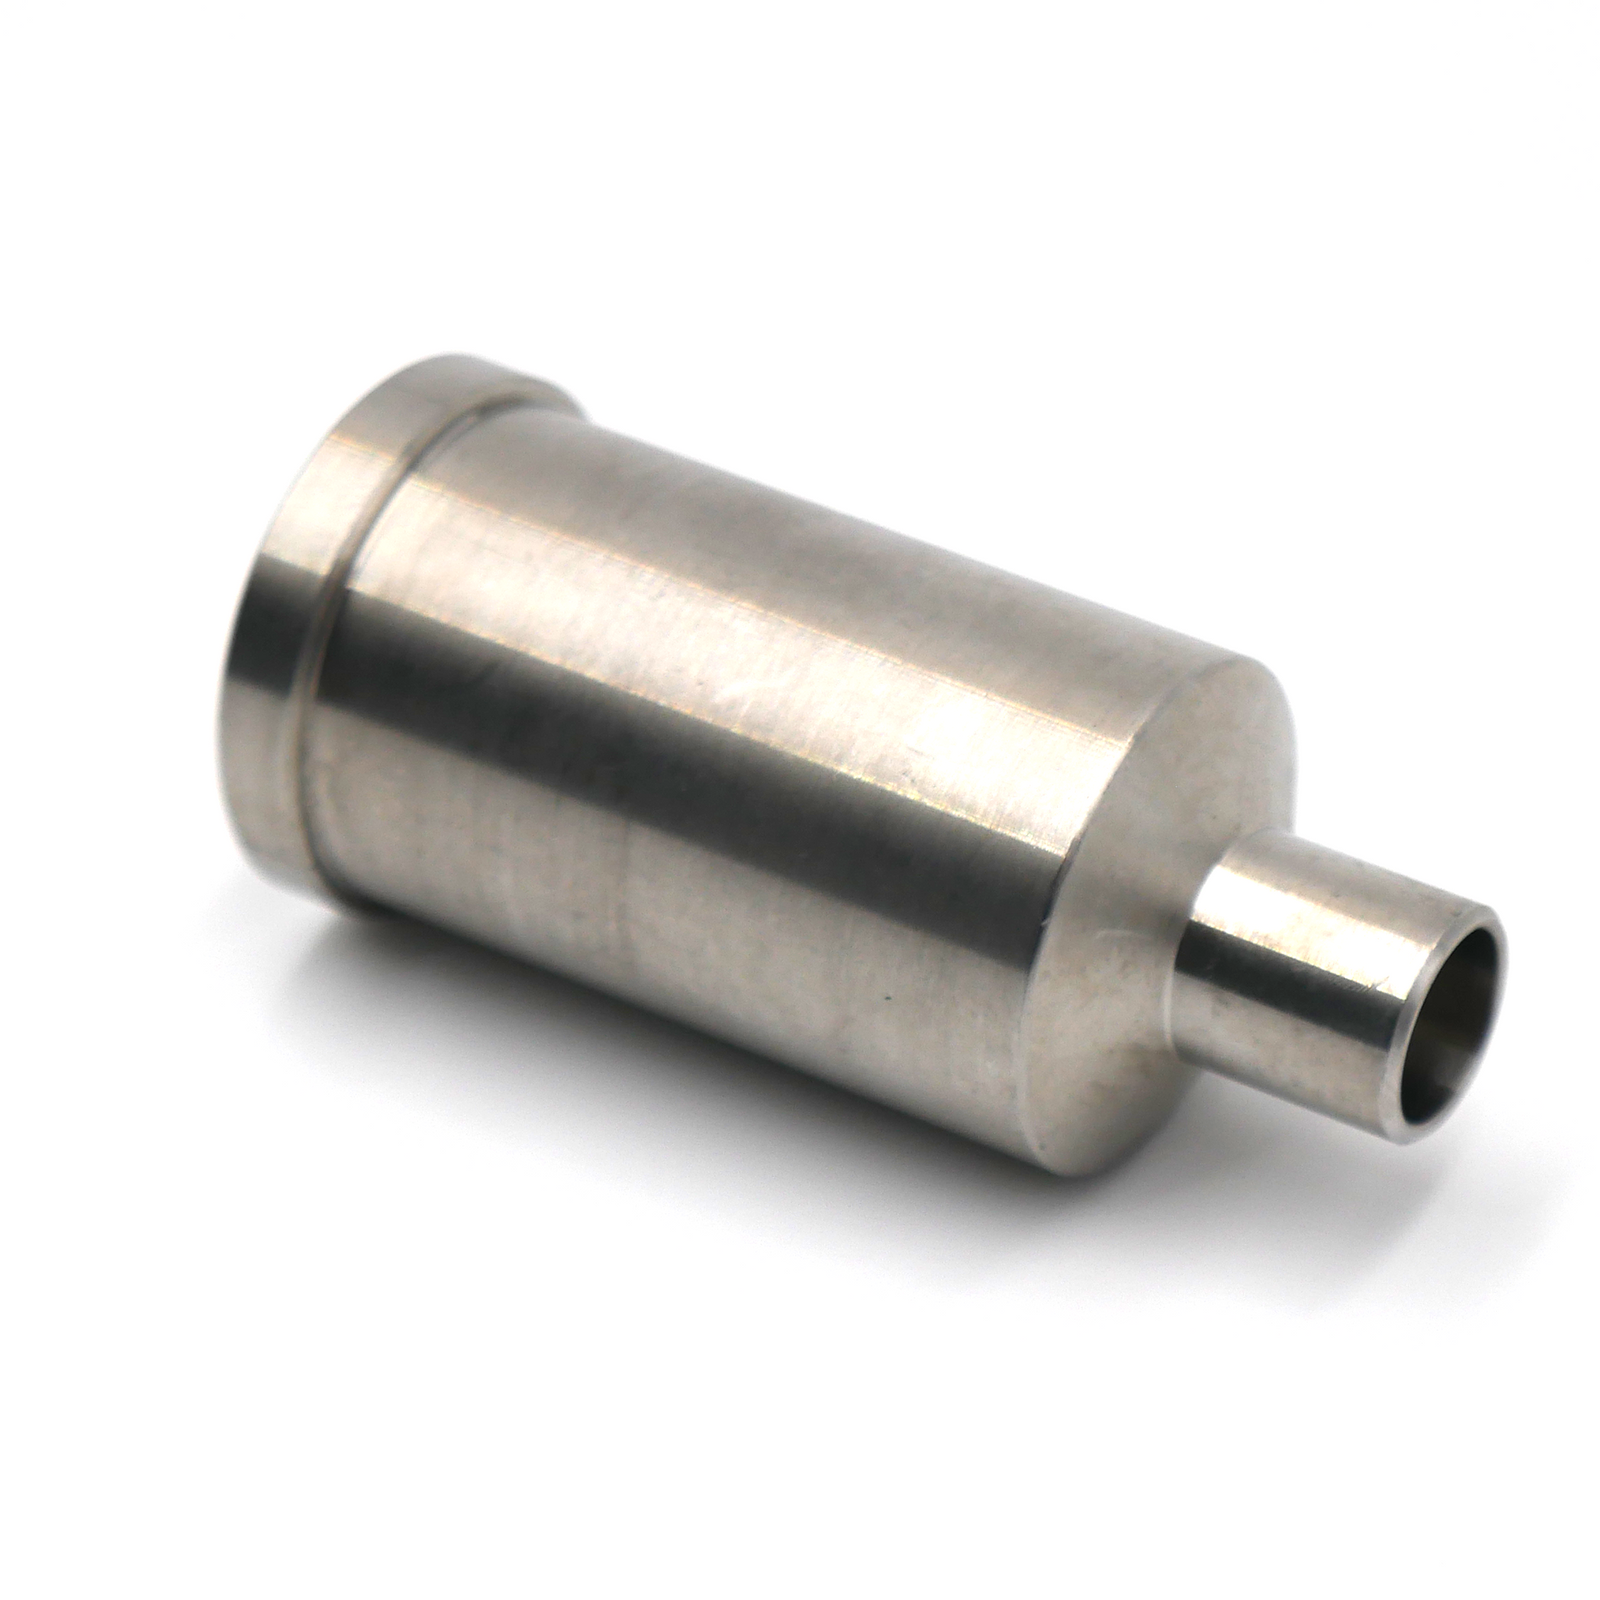 Type A 10mm Dispensing Nozzle Filling Tip